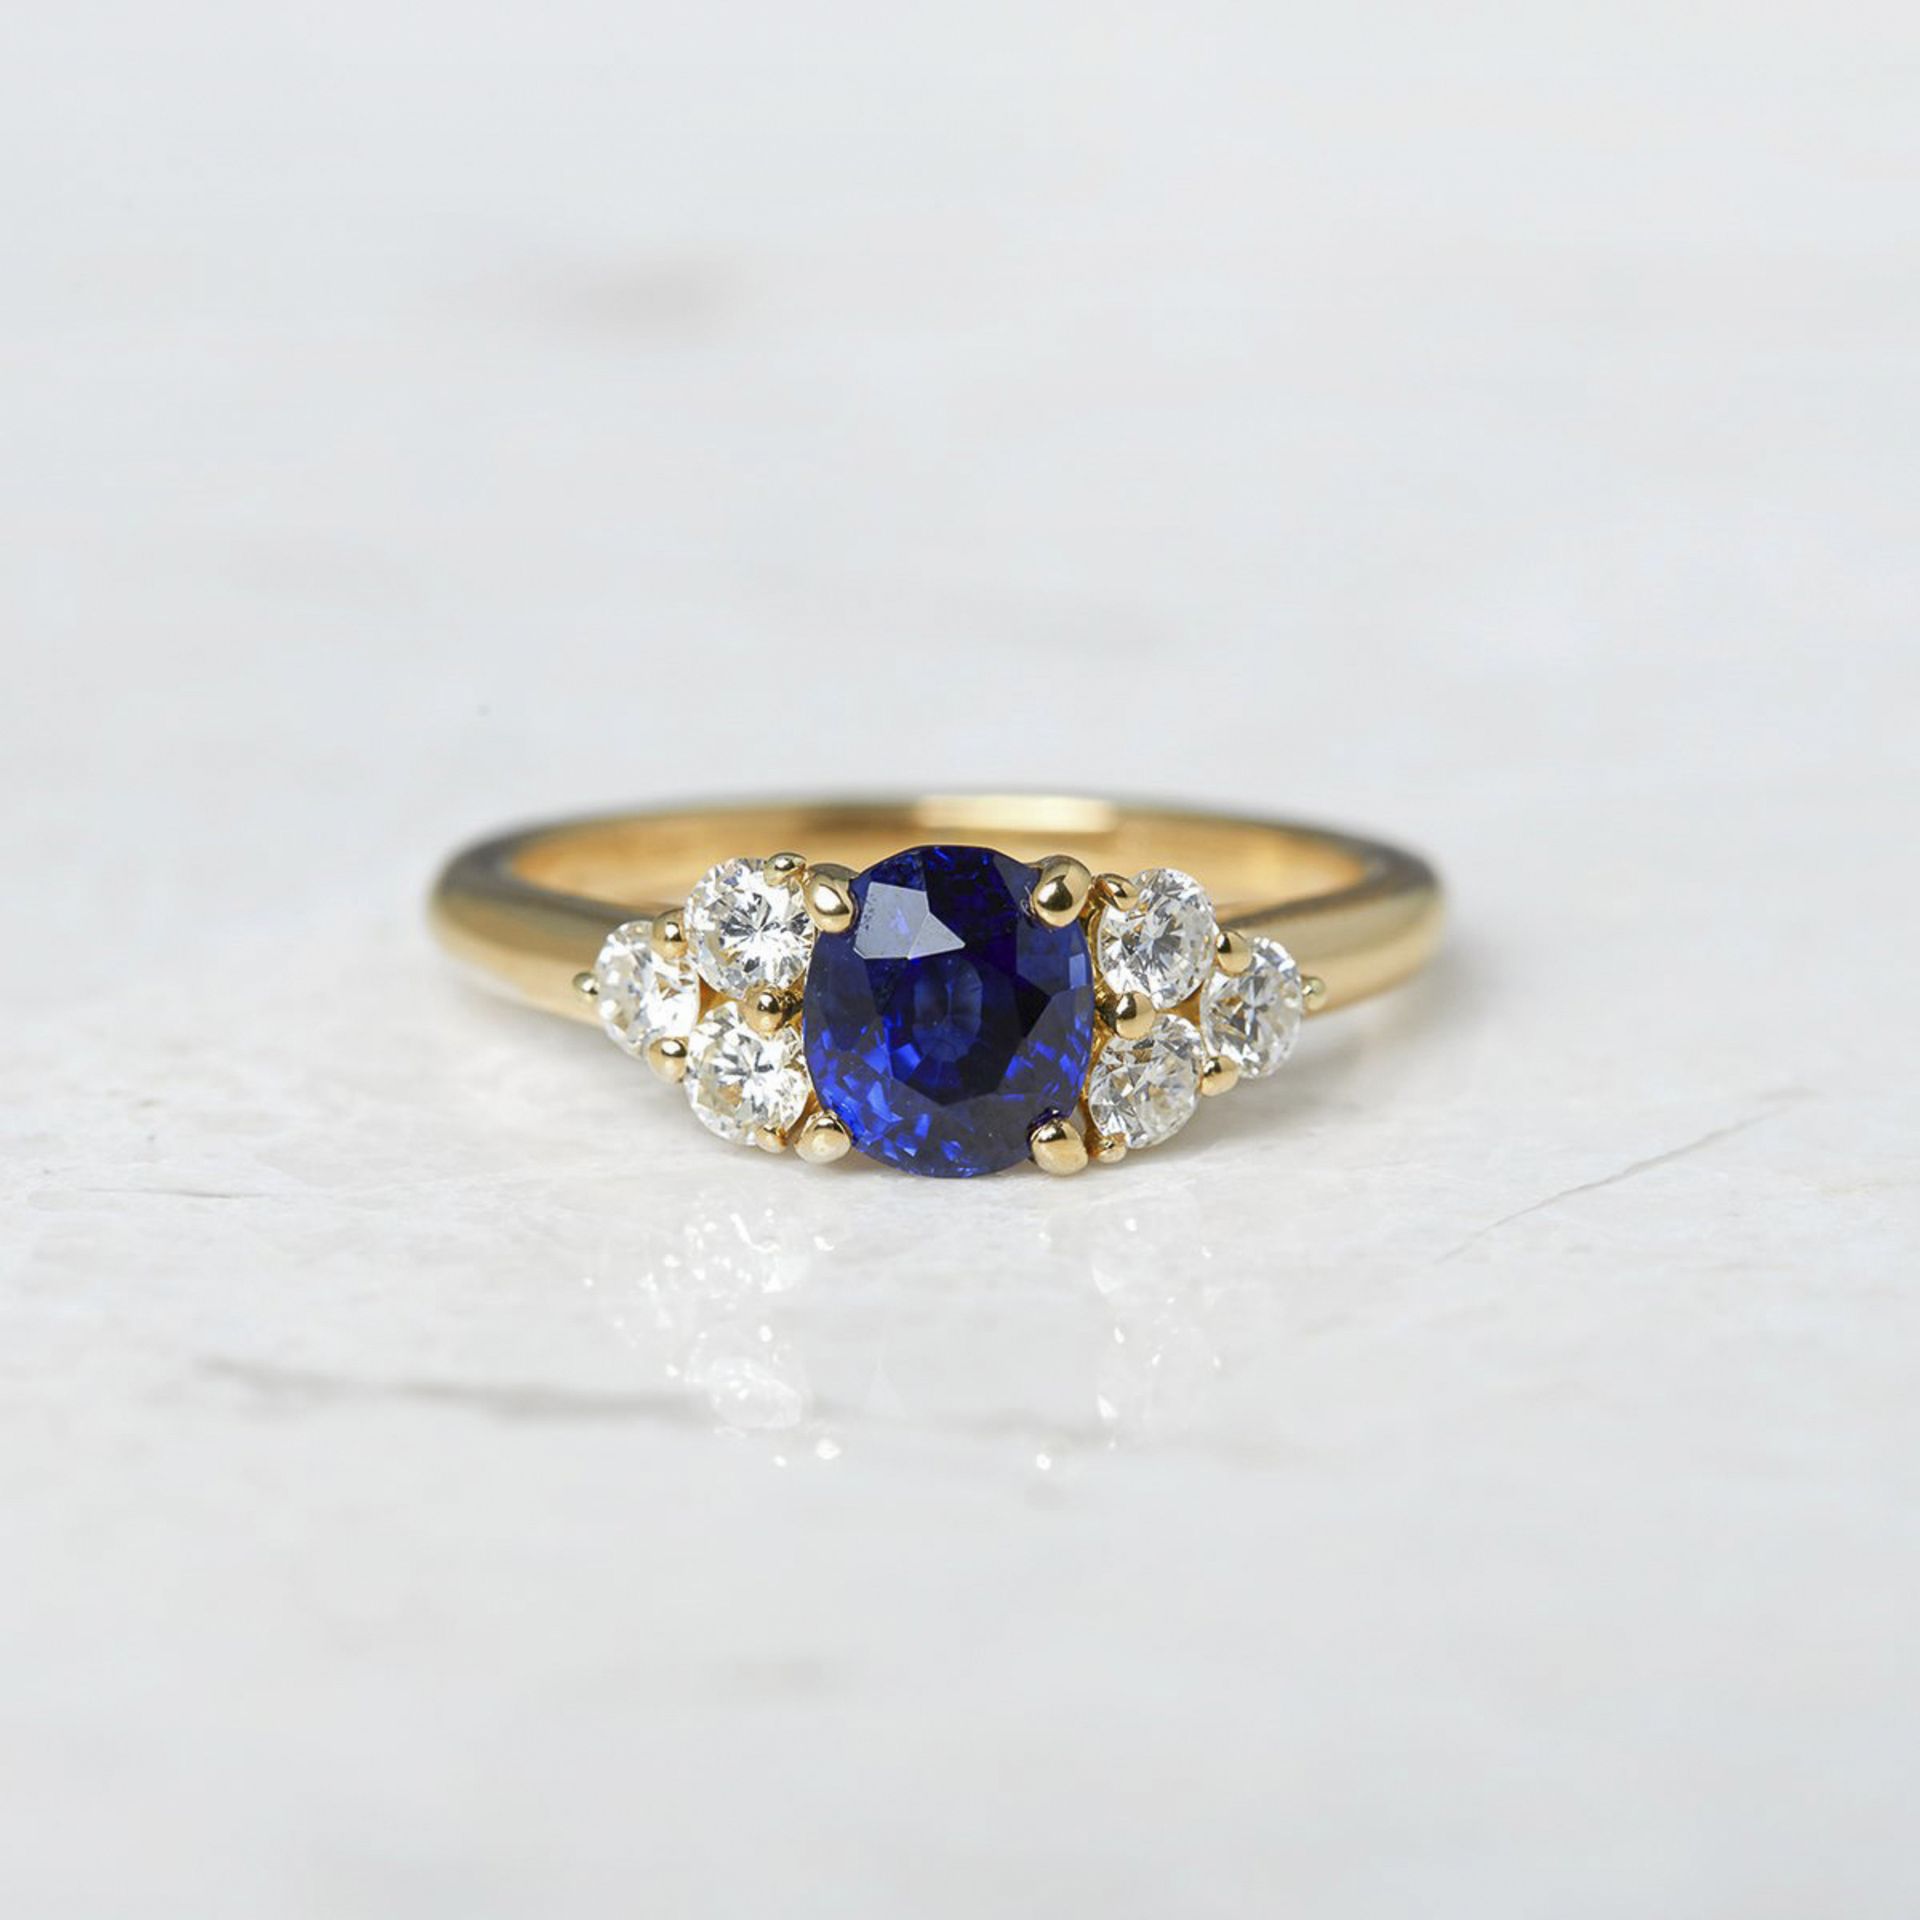 Cartier, 18k Yellow Gold 1.37ct Sapphire & 0.50ct Diamond Ring with Cartier Box & Cert / IGR Report - Image 2 of 12